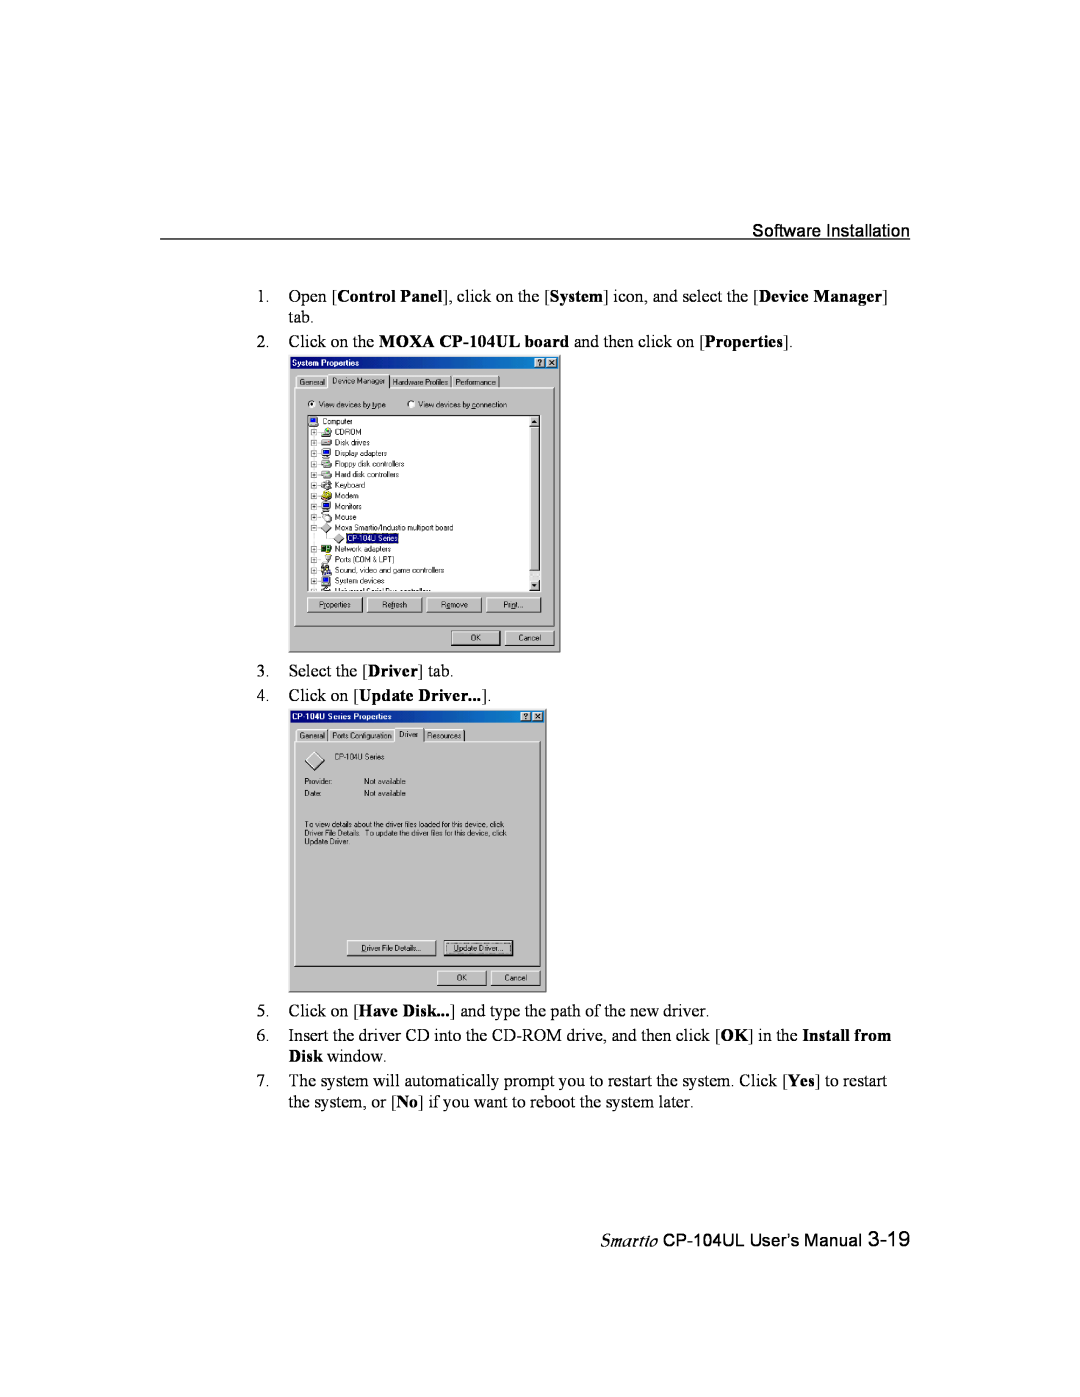 Moxa Technologies CP-104UL user manual Click on Update Driver 